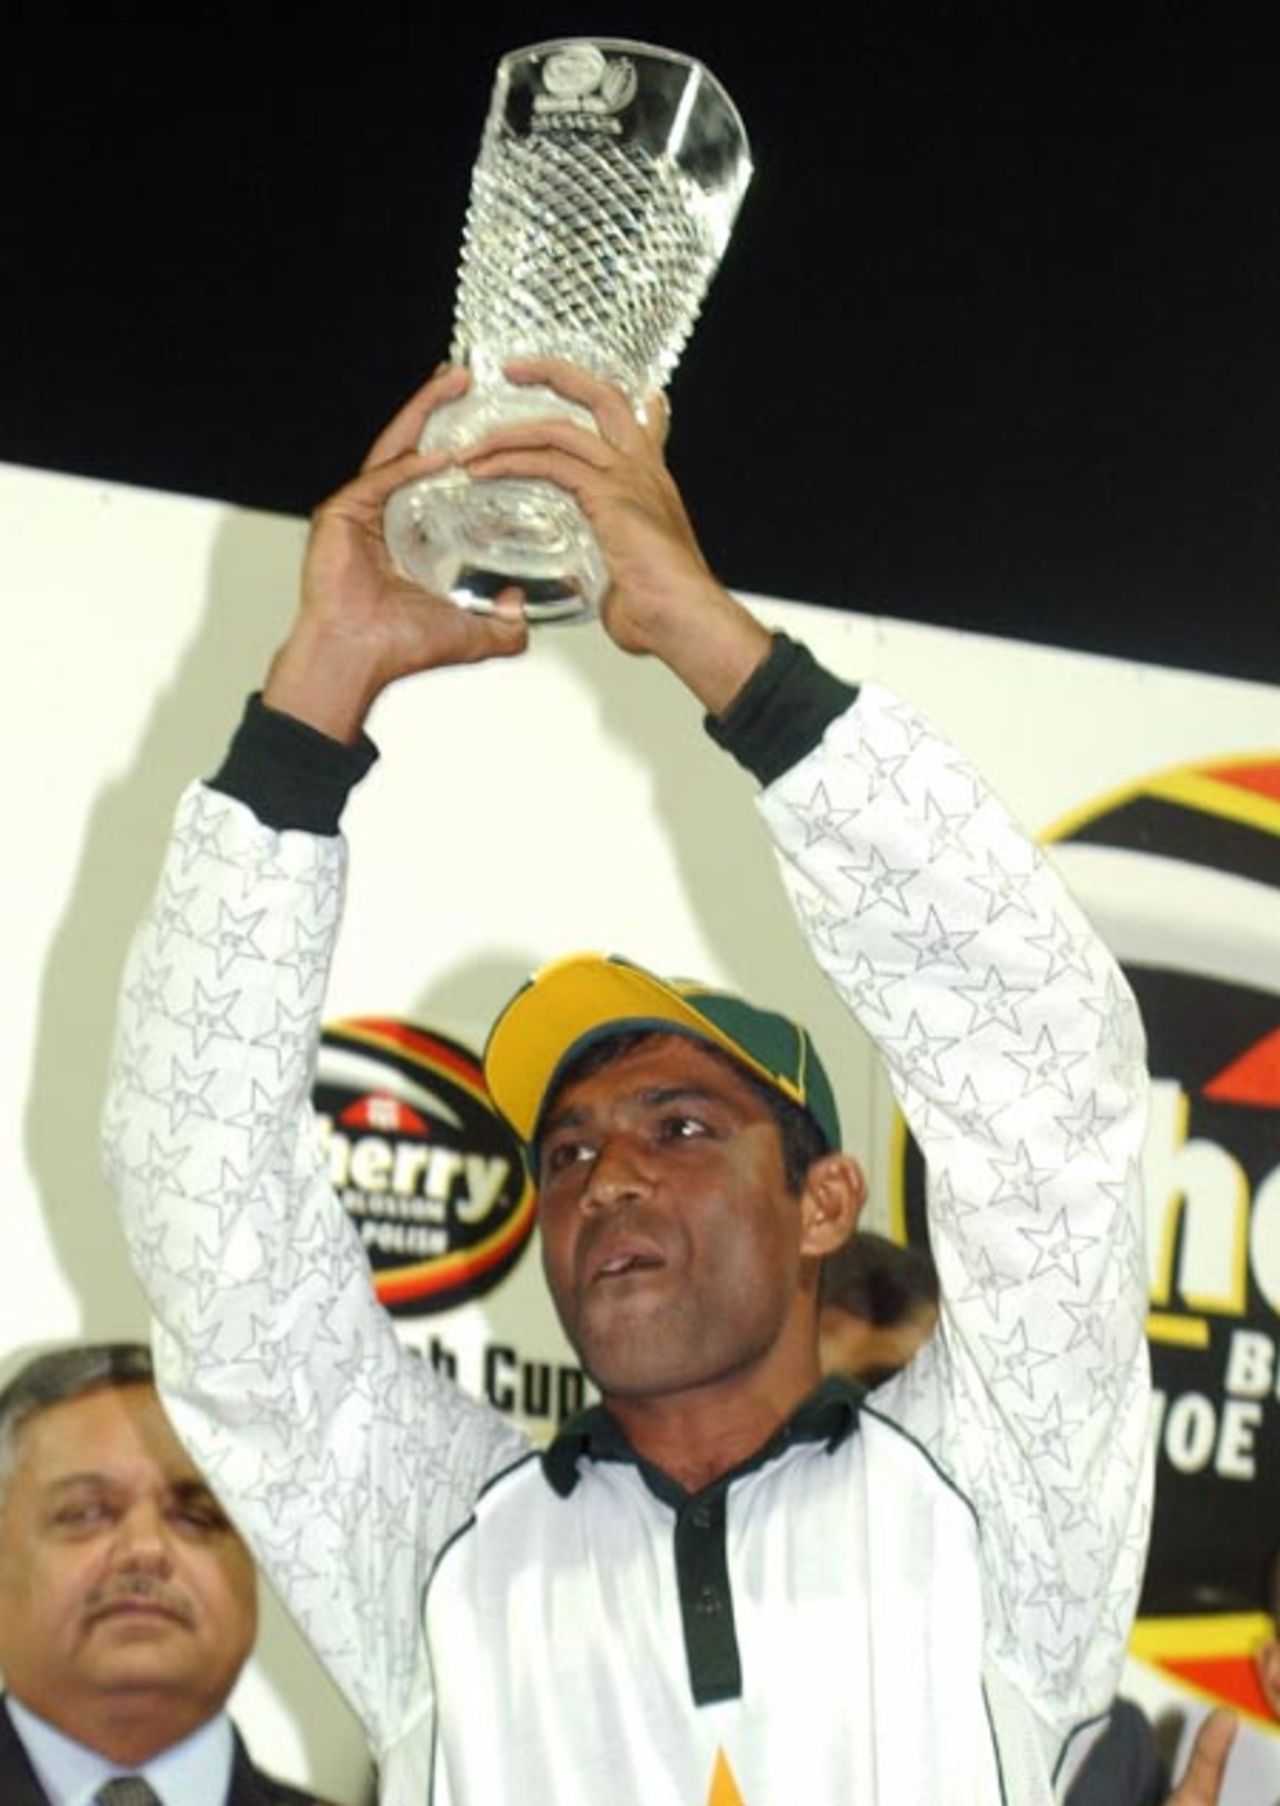 Pakistani Cricket team captain Rashid Latif lifts the Sharjah Cup 2003 after winning the final against Zimbabwe in the Four Nation Sharjah Cricket Tournament, 10 April 2003.